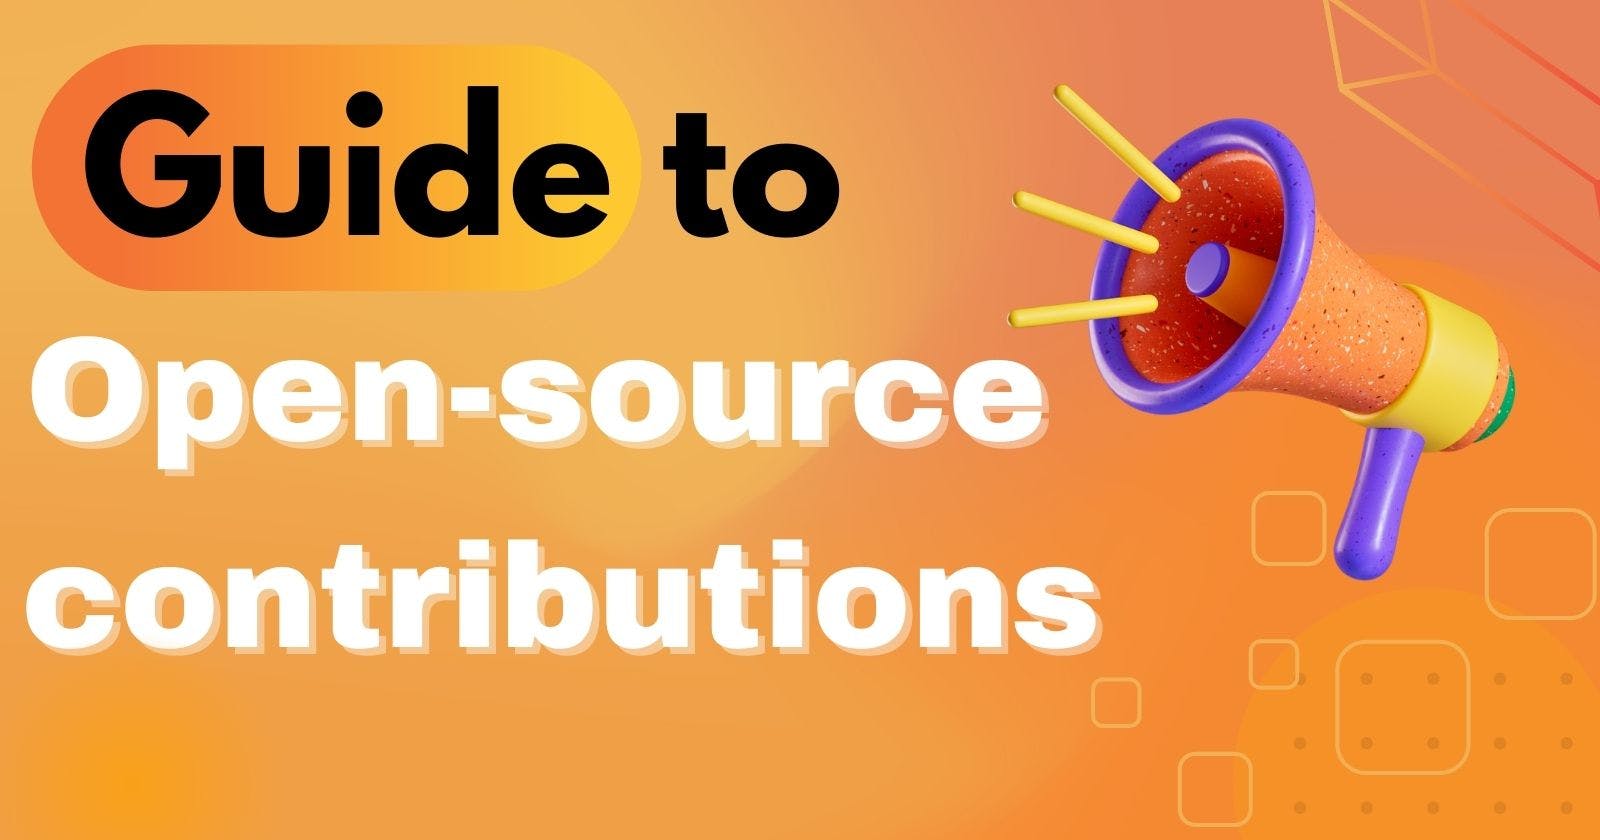 Guide to  Open-source contributions